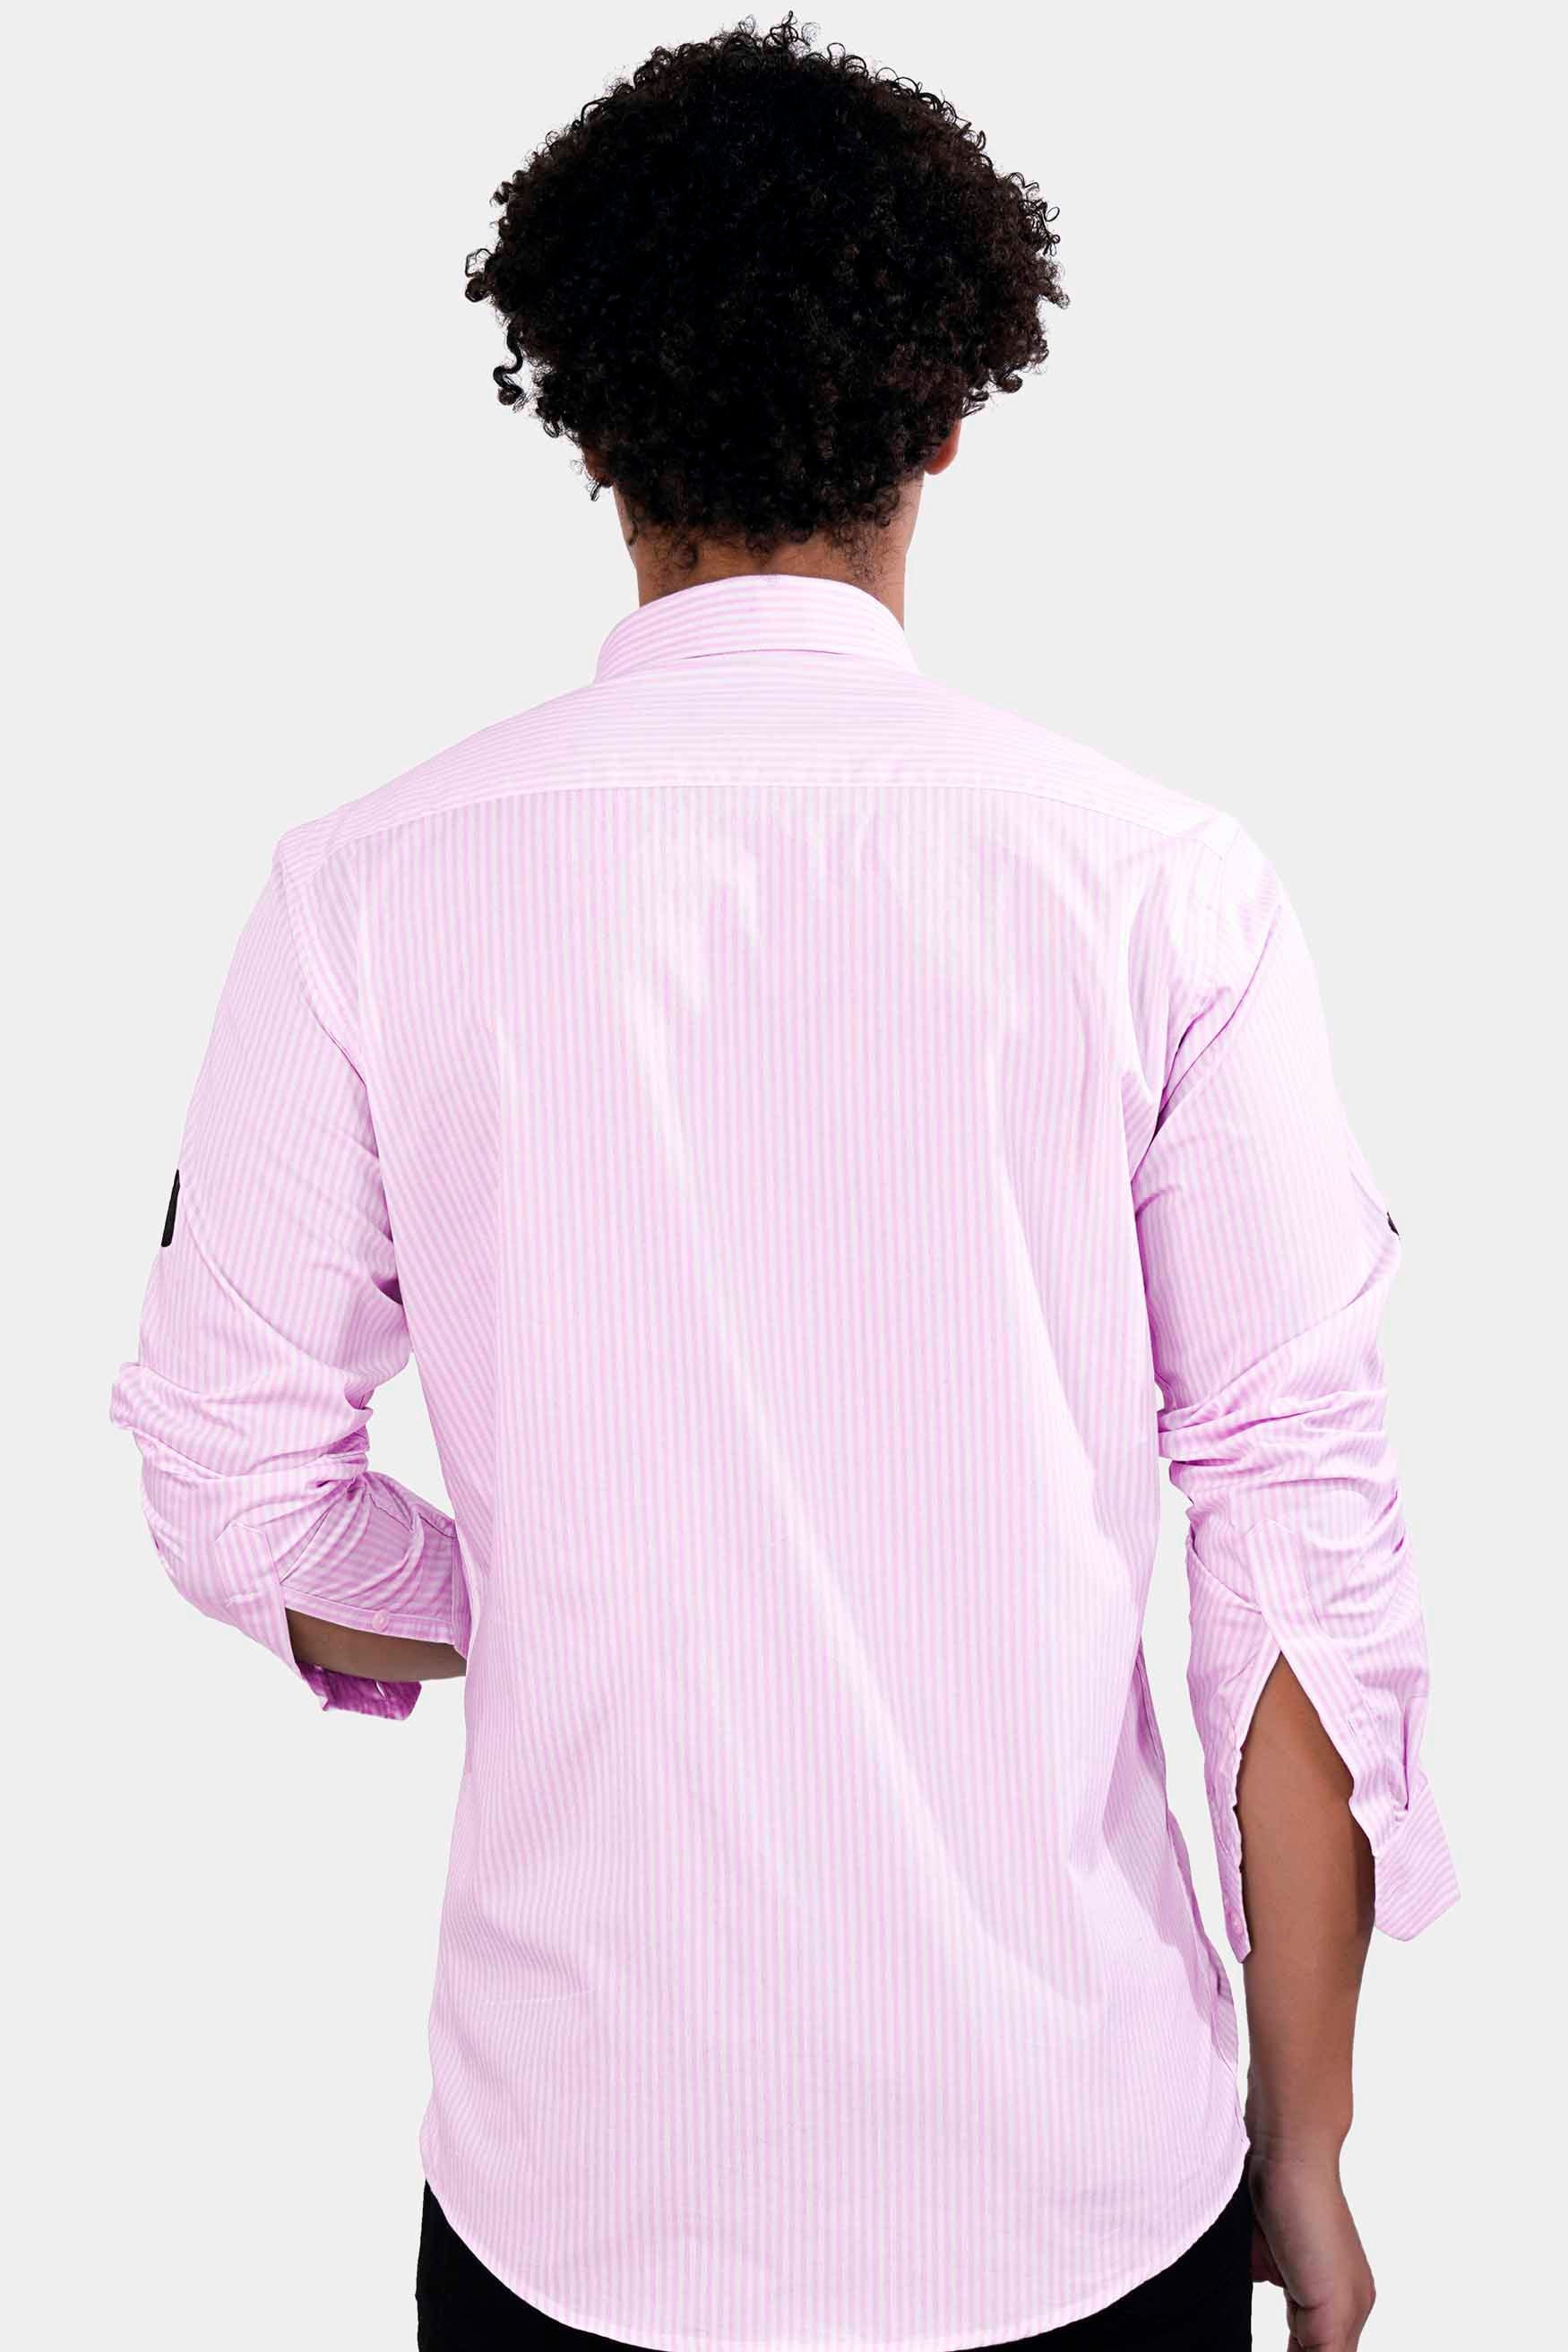 Languid Pink and White Pin-Striped with Hand Painted Premium Cotton Designer Shirt 6339-CA-ART-38, 6339-CA-ART-H-38, 6339-CA-ART-39, 6339-CA-ART-H-39, 6339-CA-ART-40, 6339-CA-ART-H-40, 6339-CA-ART-42, 6339-CA-ART-H-42, 6339-CA-ART-44, 6339-CA-ART-H-44, 6339-CA-ART-46, 6339-CA-ART-H-46, 6339-CA-ART-48, 6339-CA-ART-H-48, 6339-CA-ART-50, 6339-CA-ART-H-50, 6339-CA-ART-52, 6339-CA-ART-H-52